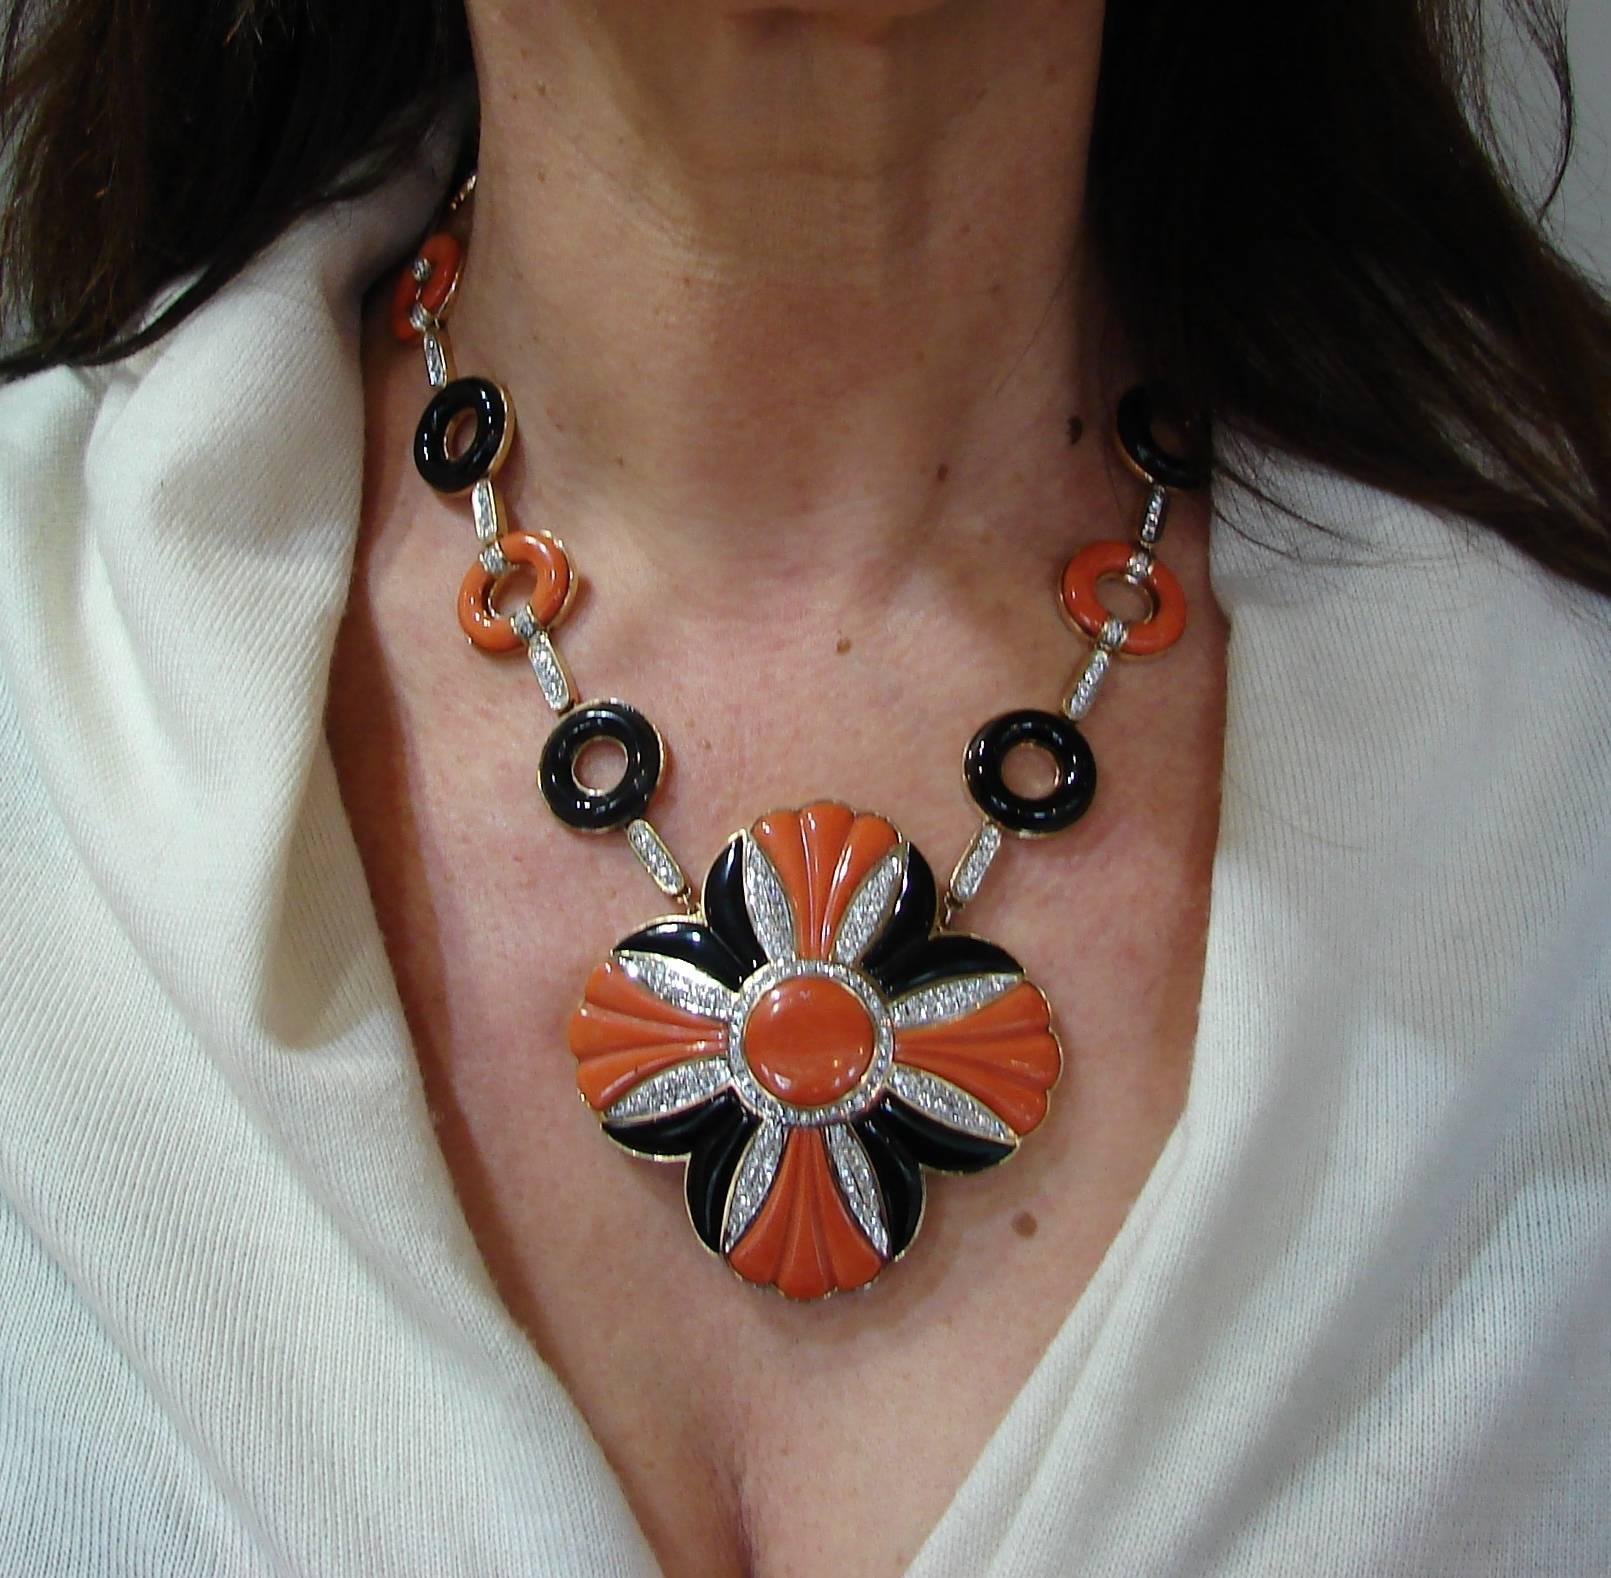 Bold, colorful necklace created in the 1970's. It definitely makes a statement. 
The necklace is made of 18 karat yellow gold, carved Mediterranean coral and black onyx and accented with round brilliant cut diamonds (G-H color, VS clarity, total